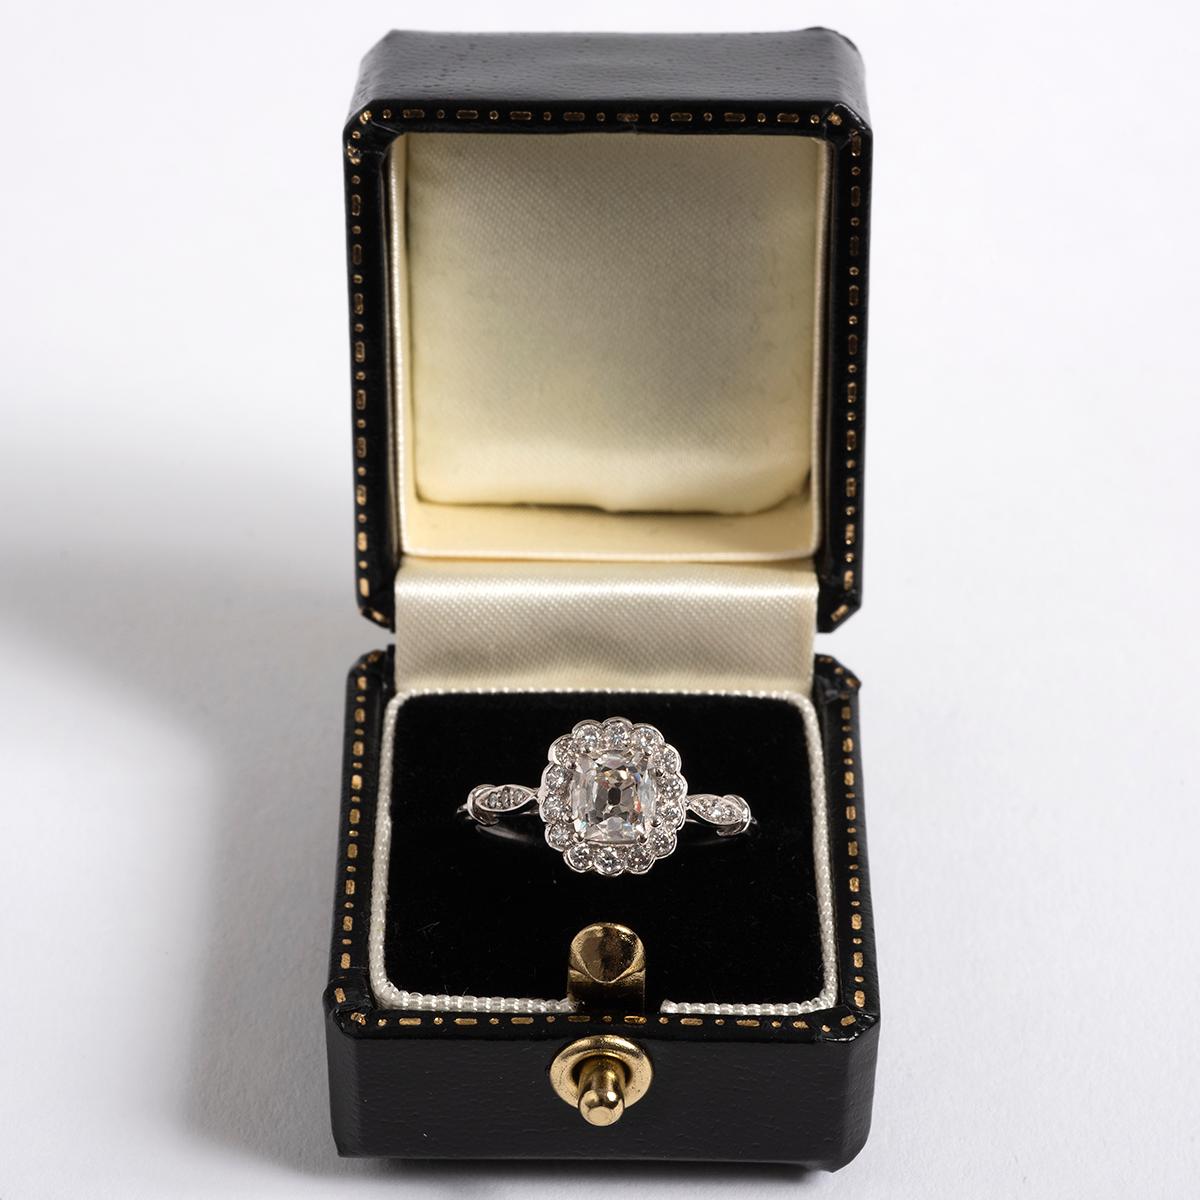 A unique piece within our carefully curated Vintage & Prestige fine jewellery collection, we are delighted to present the following:

Our notable diamond cluster ring has a platinum band and features an old cushion cut centre diamond, est. 1.03ct